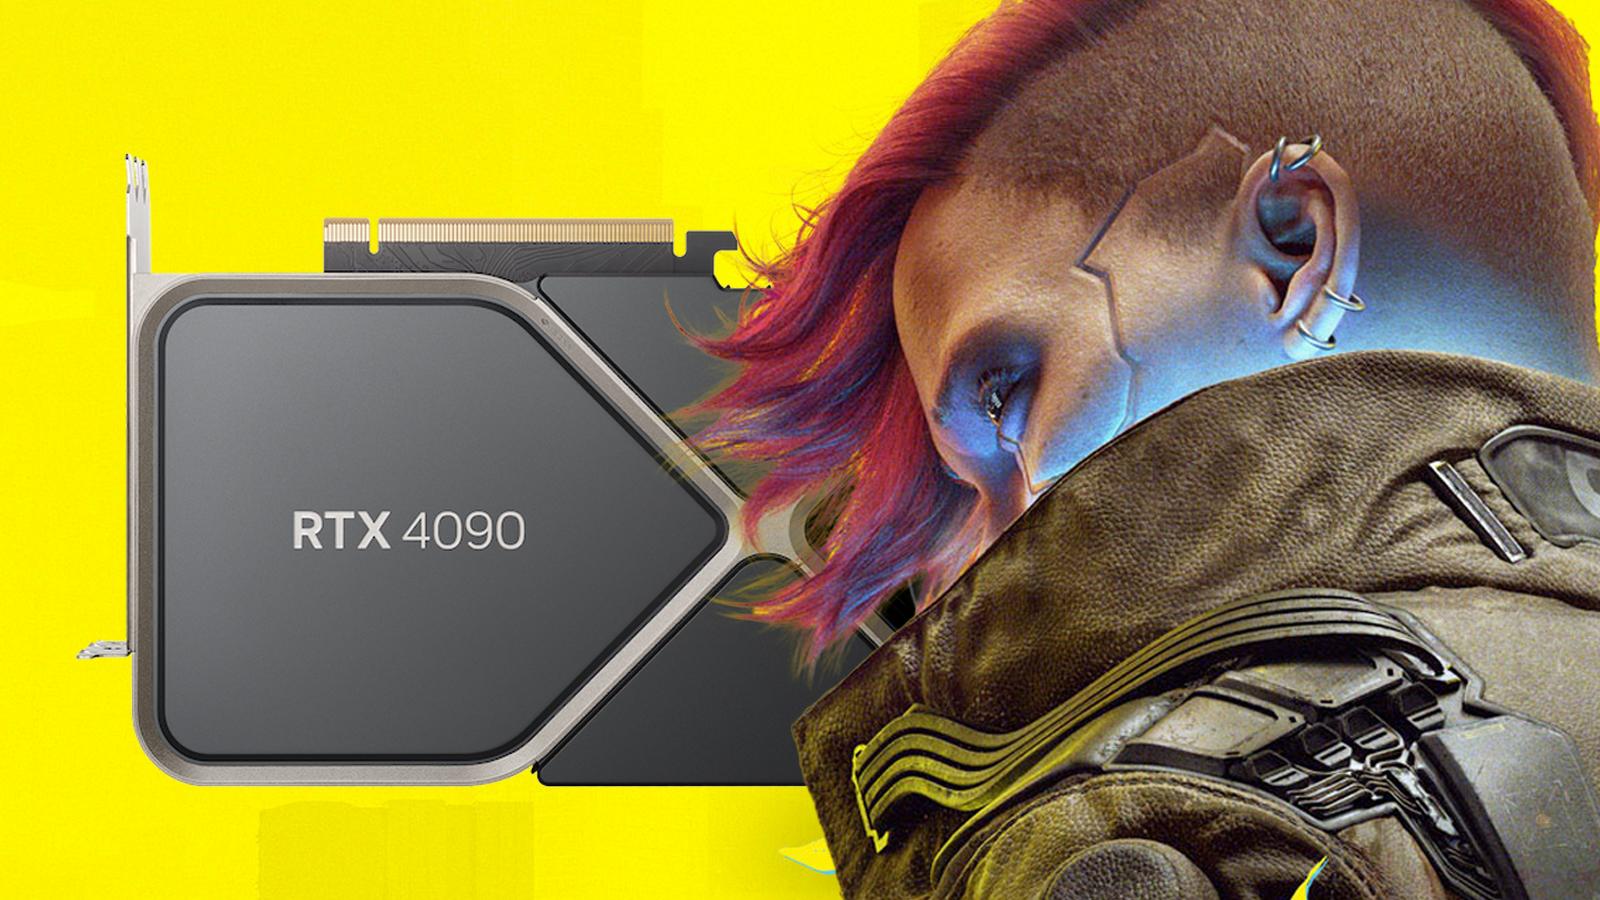 V from Cyberpunk with an RTX 4090